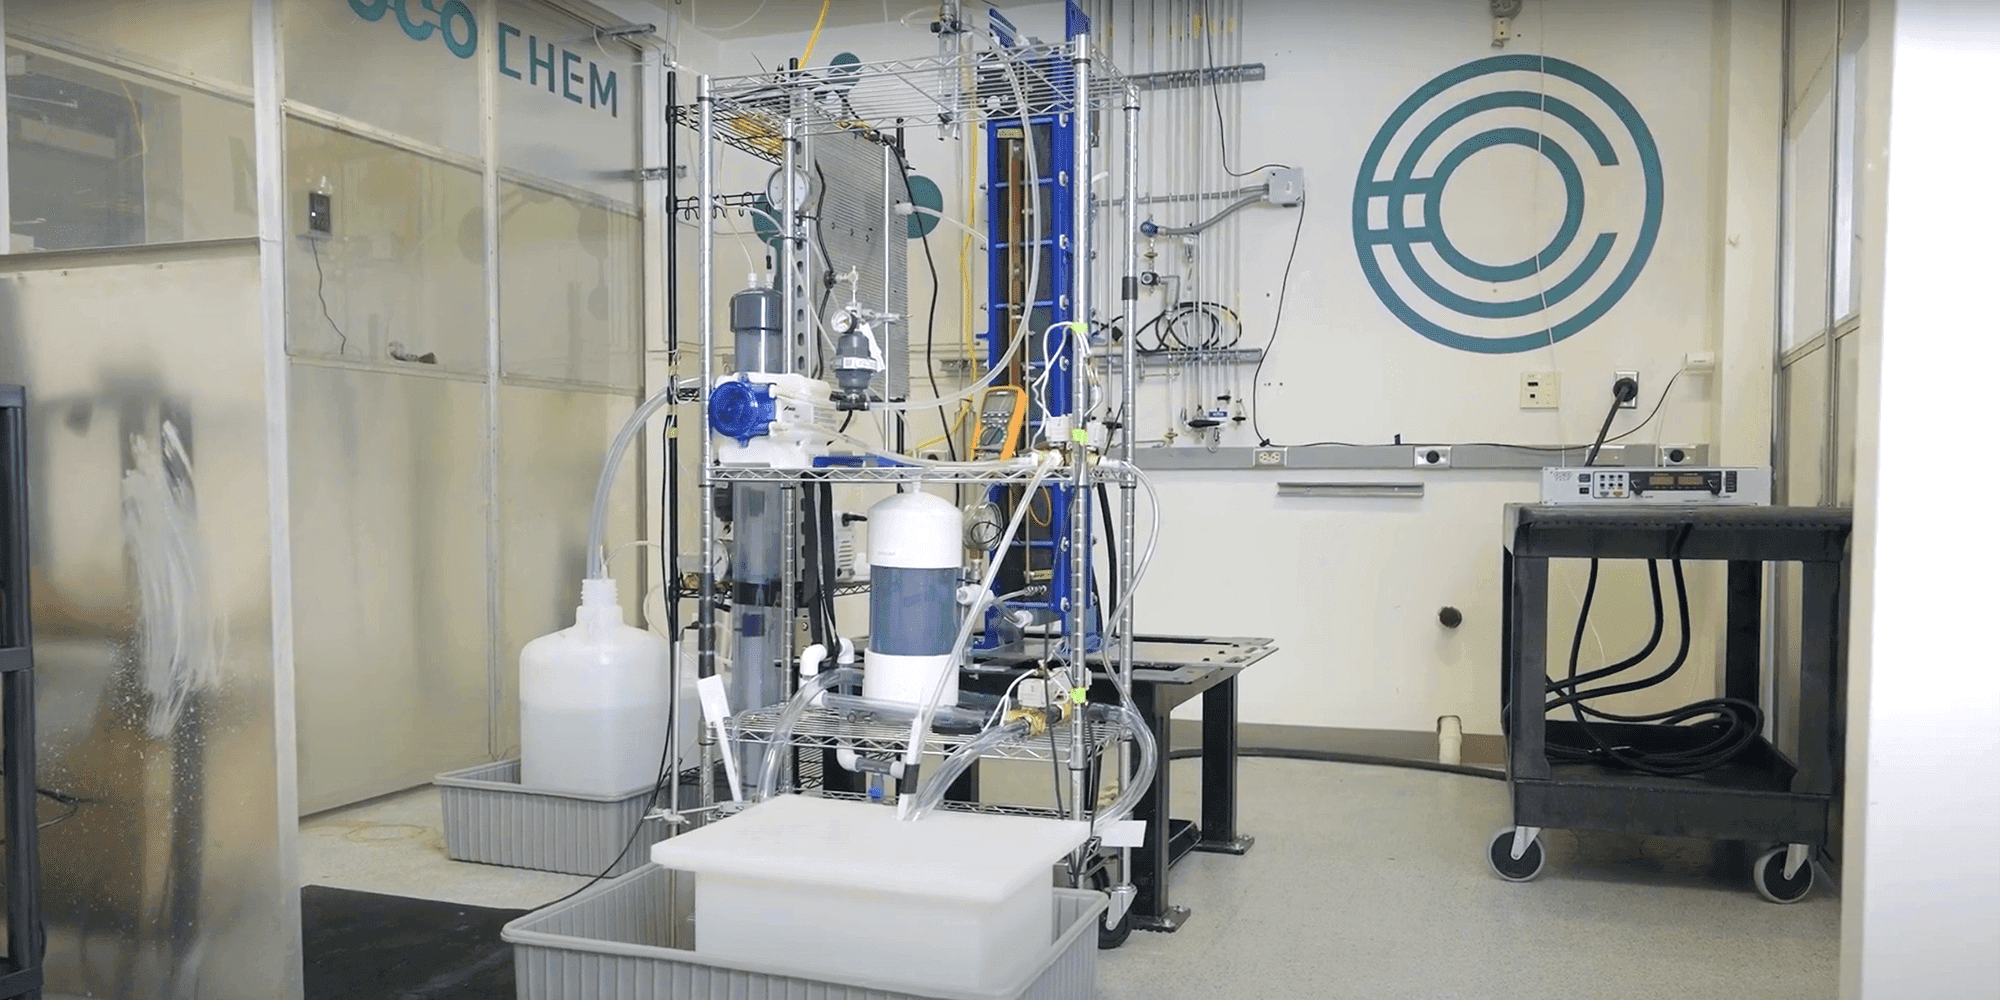 Product OCOchem wins $2.5M U.S. Department of Energy “Hydrogen Shot” grant to advance clean hydrogen technologies image